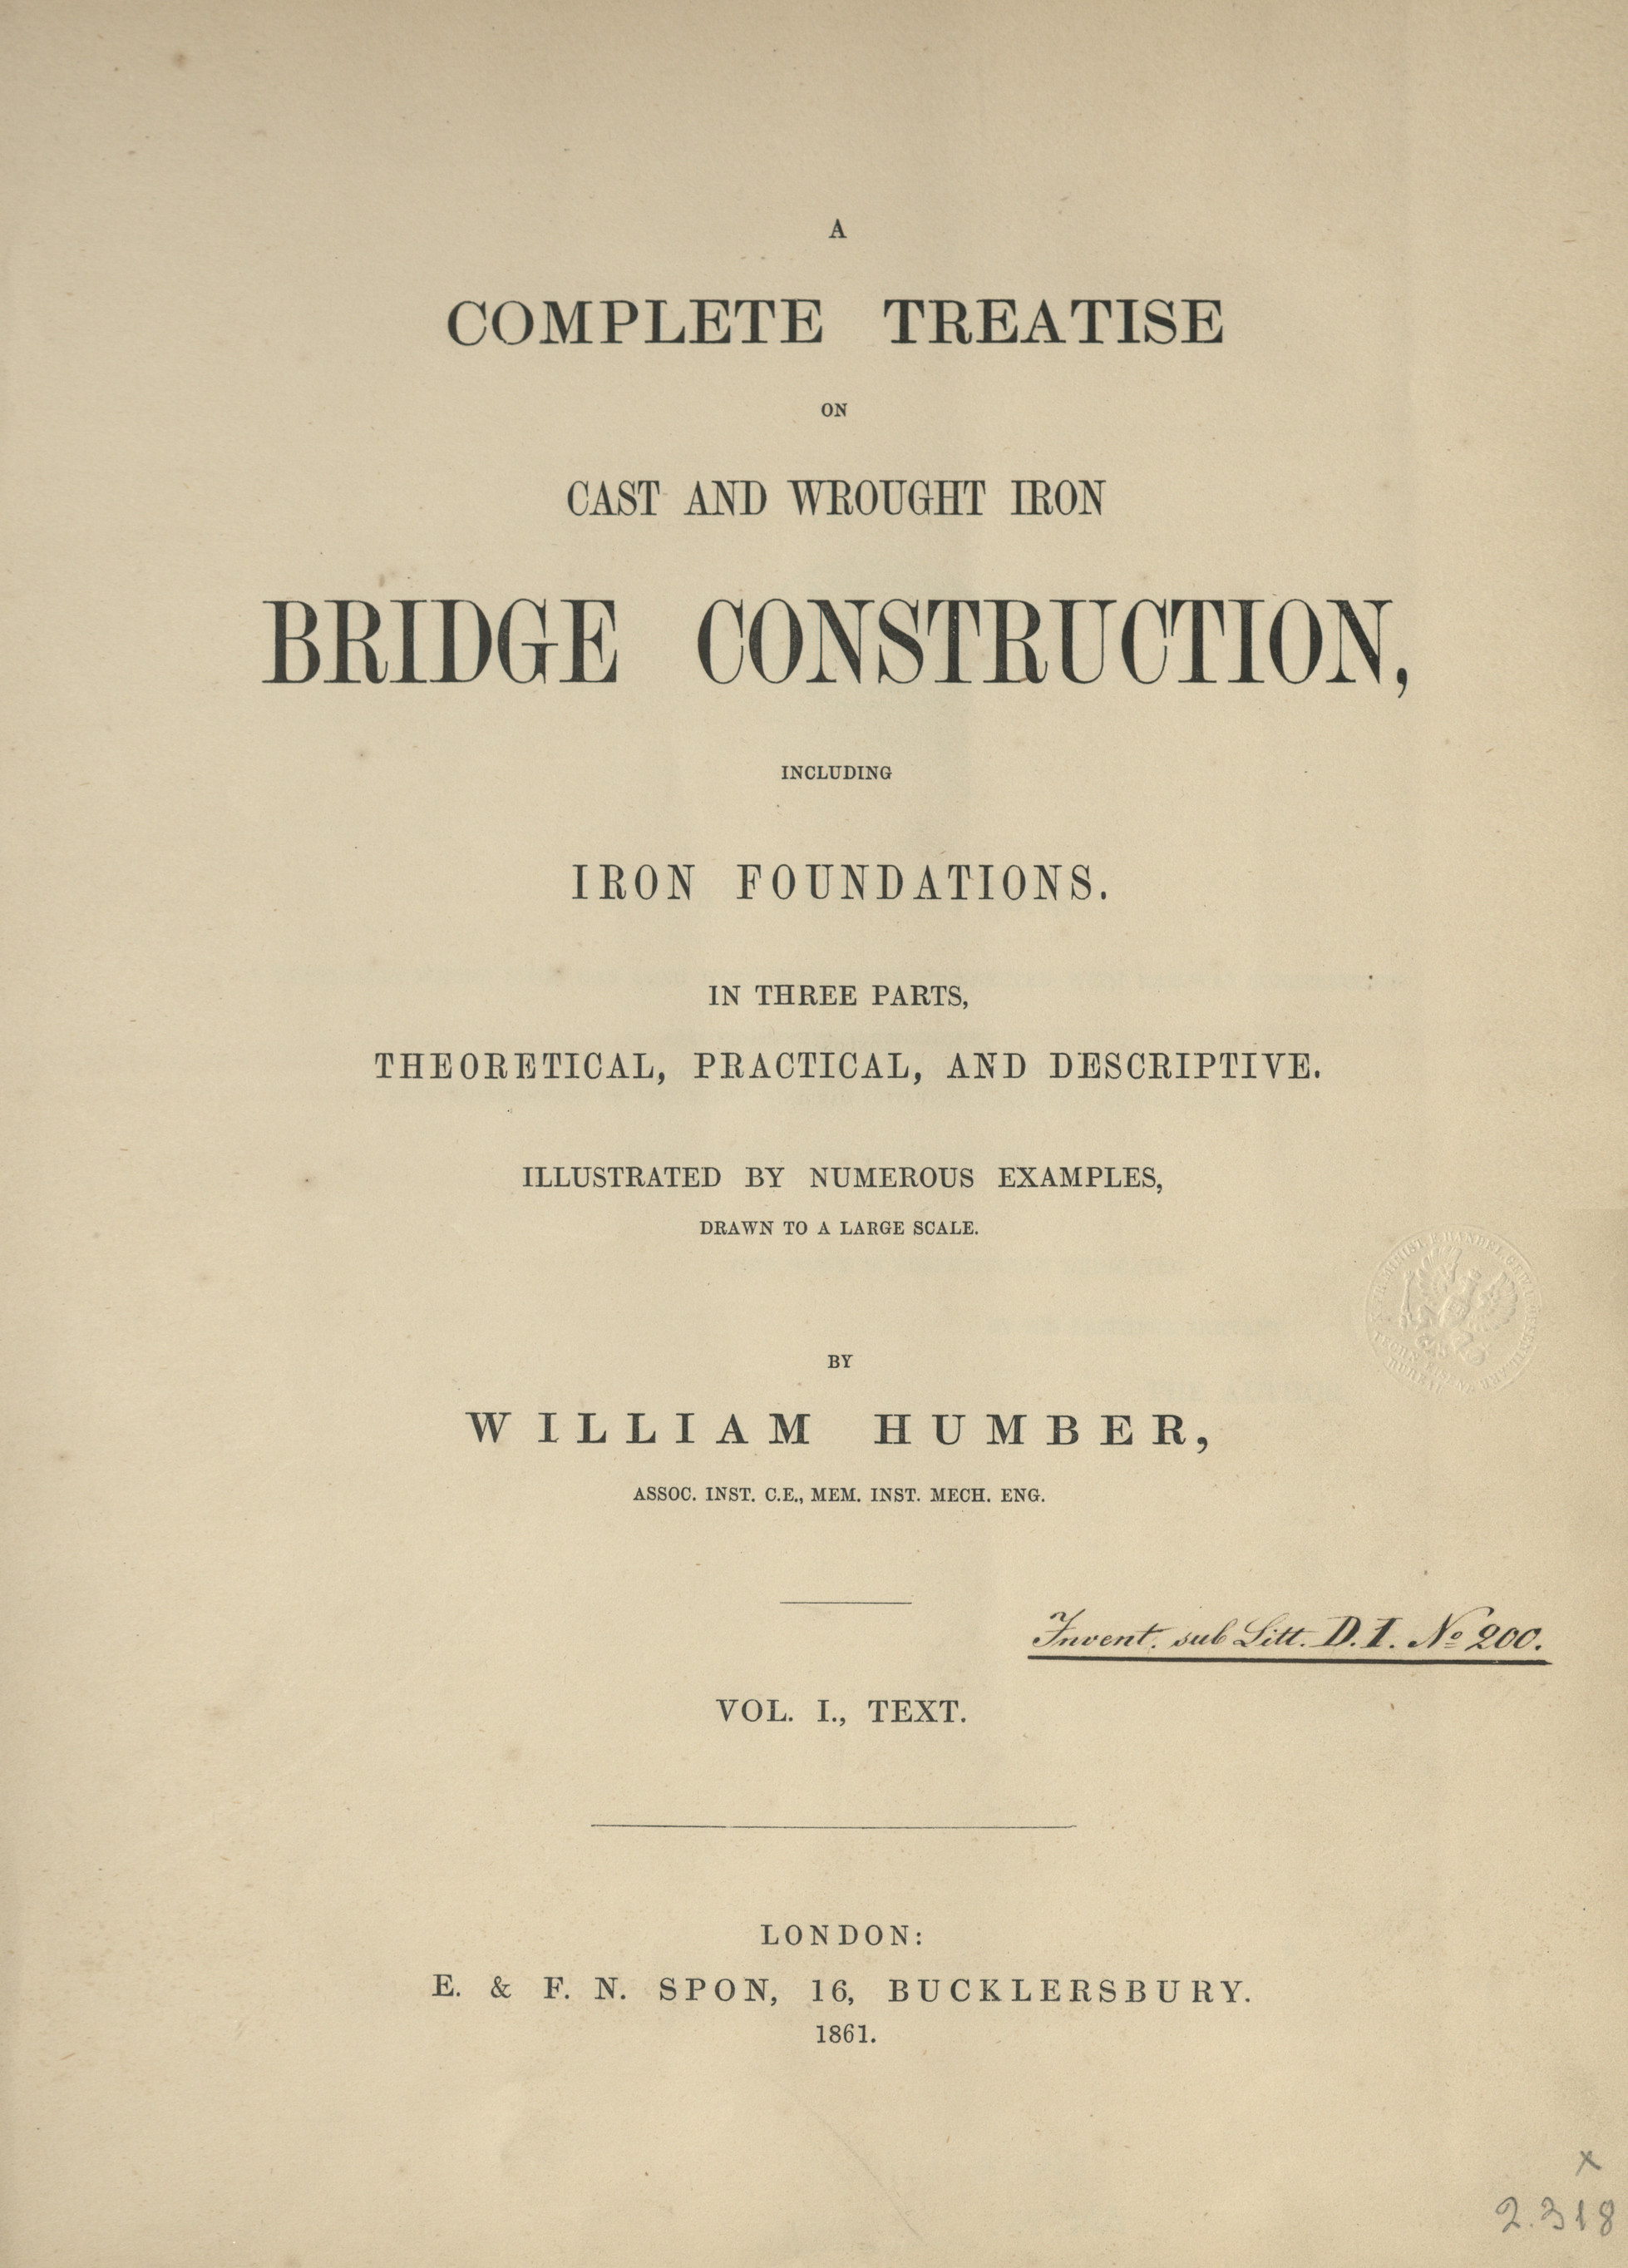 A complete treatise on cast and wrought iron bridge construction, including iron foundations : in three parts, theoretical, practical, and descriptive : illustrated by numerous examples, drawn to a large scale. Vol. 1, Text